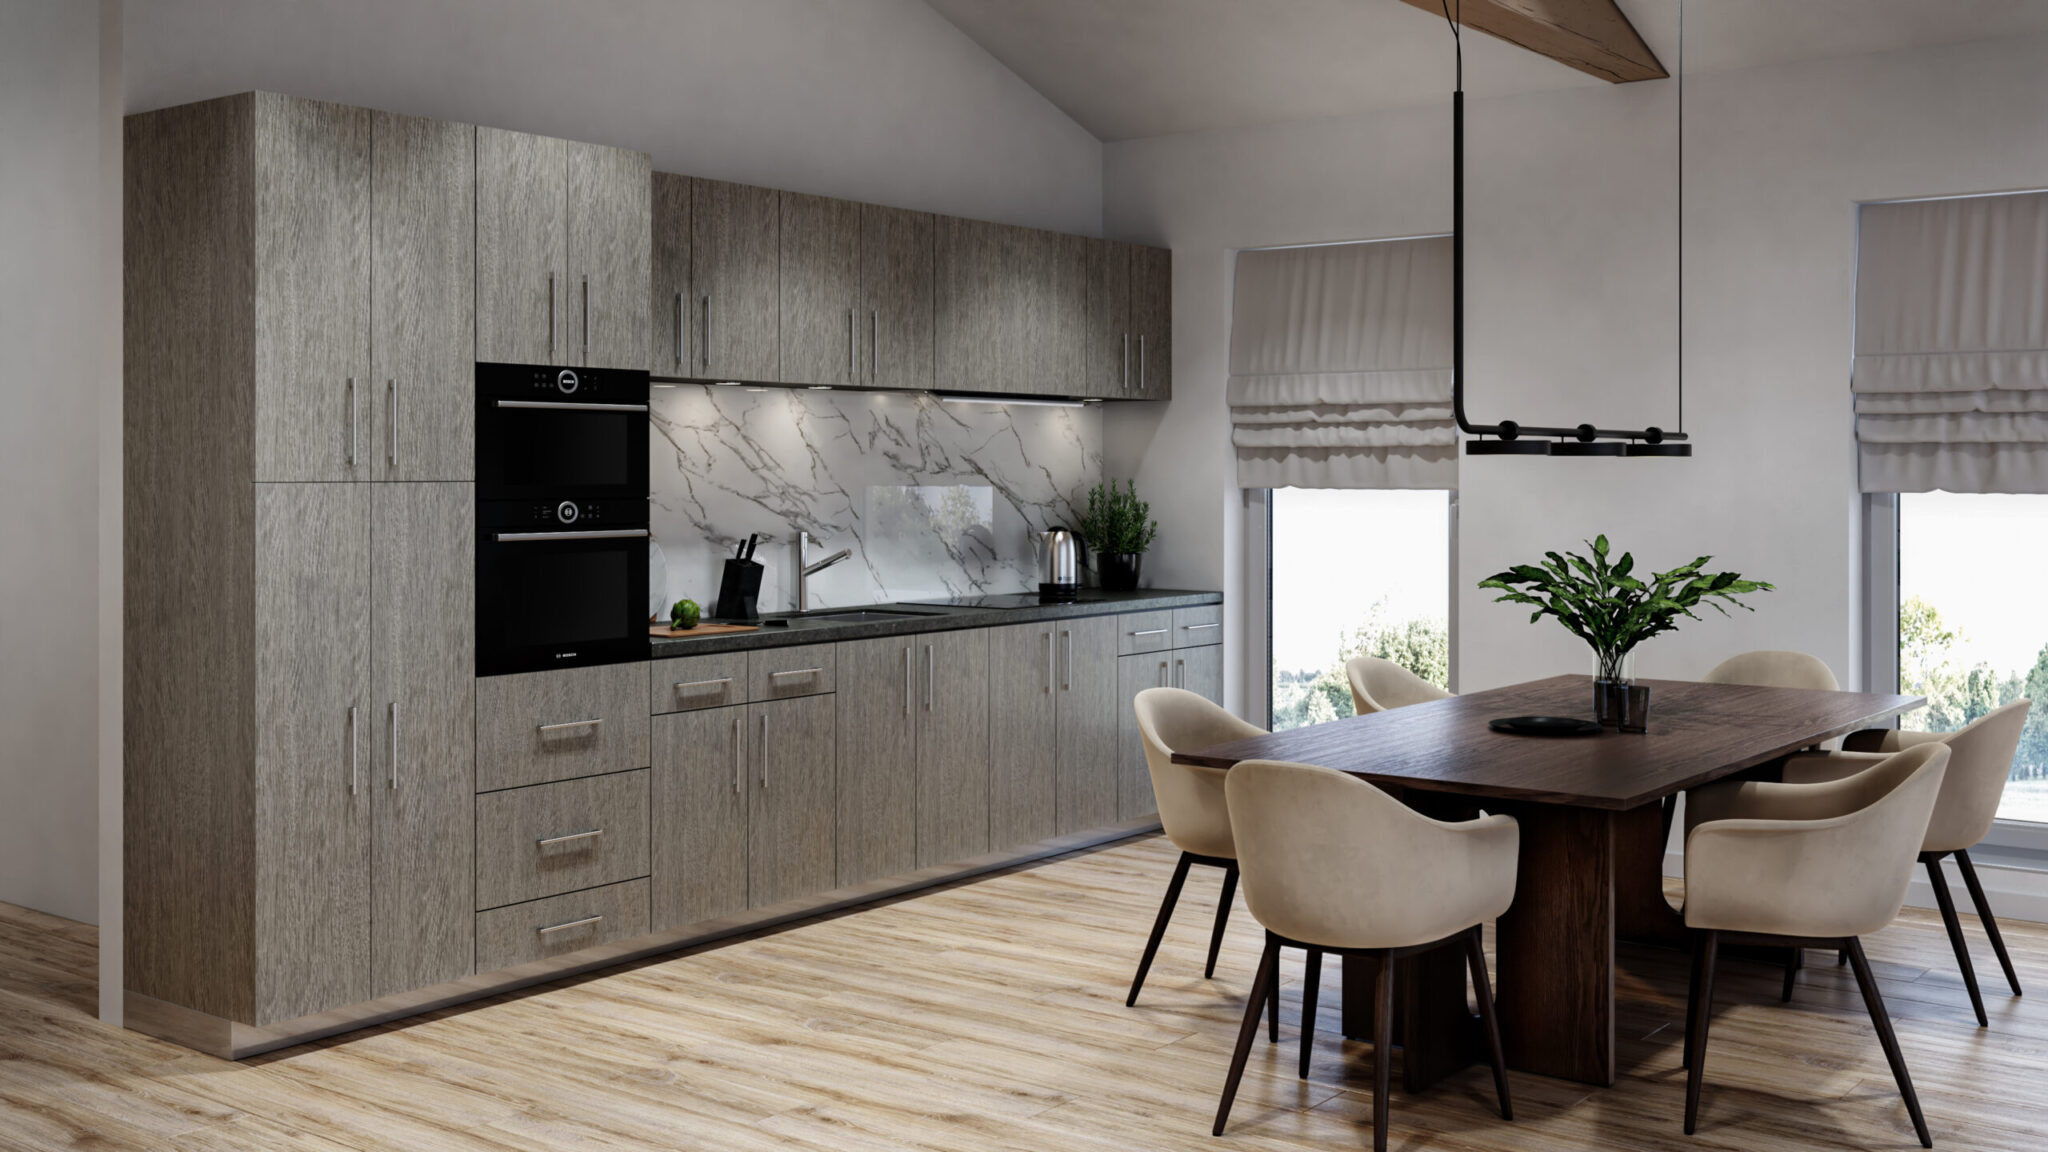 Modern kitchen style with contemporary grey kitchen cabinets